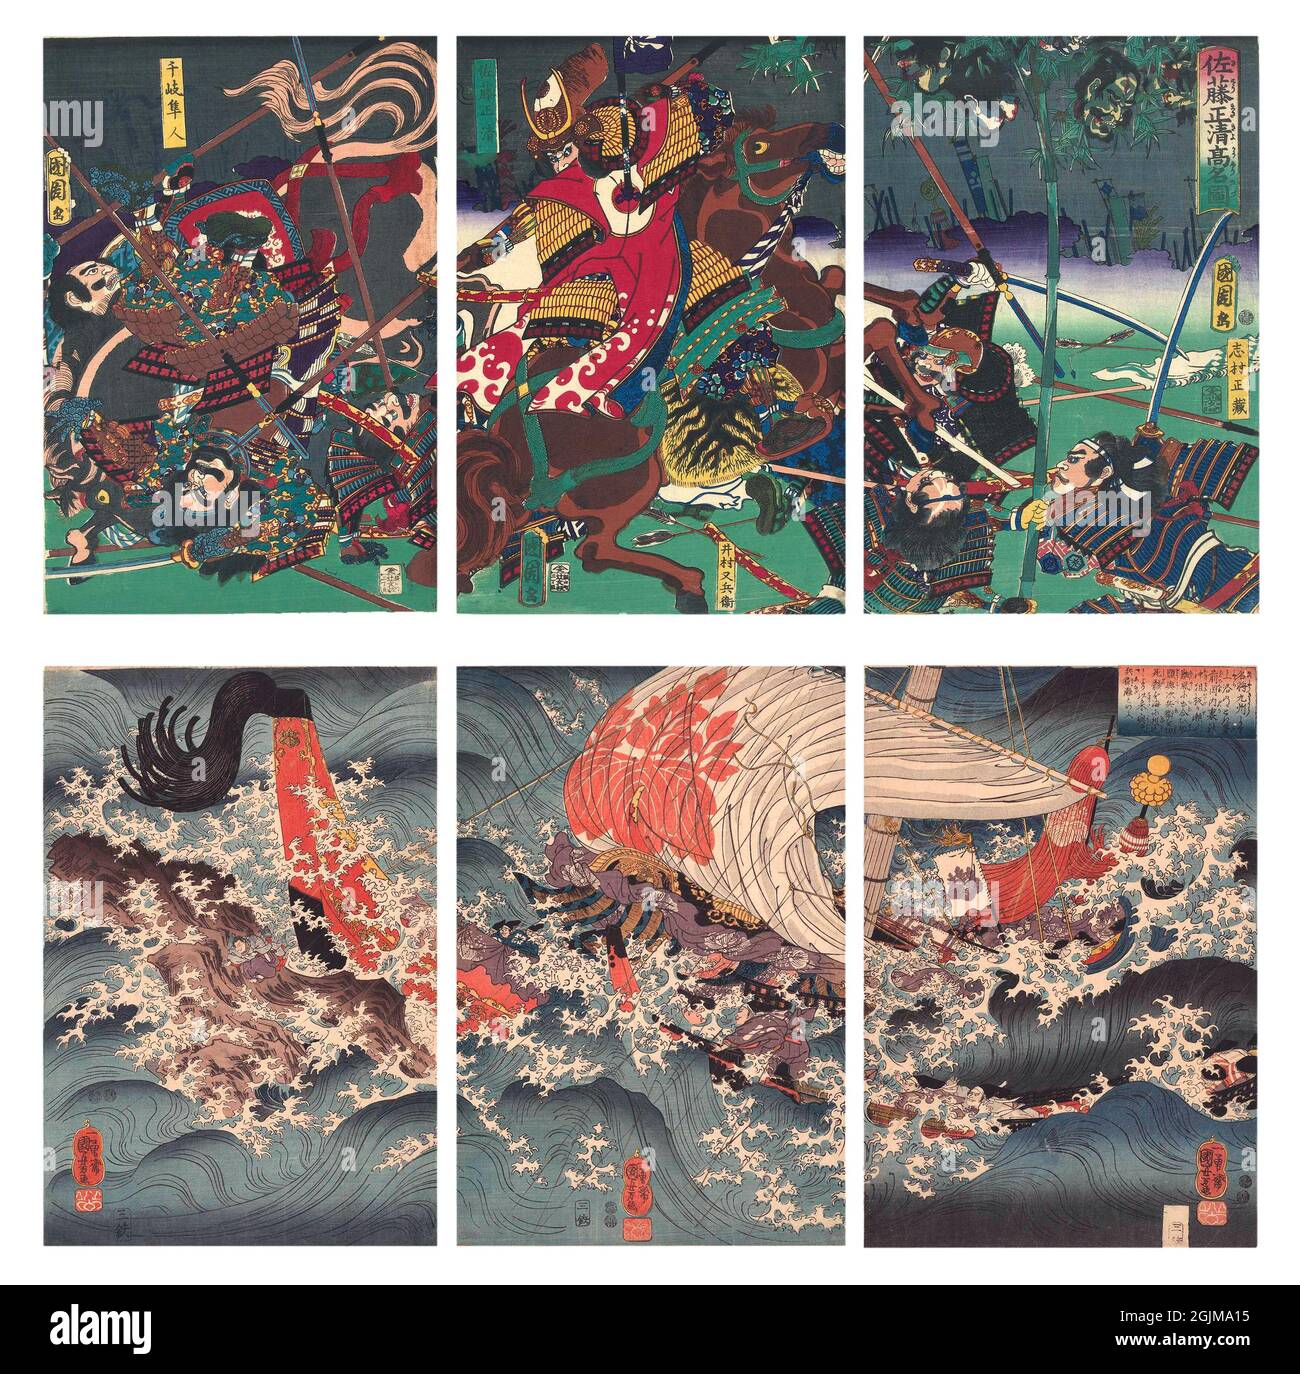 Unique optimised and enhanced arrangement of two nineteenth century Japanese woodcut illustrations as tryptychs: Top: Japan: Warriors fighting with katana swords amid severed heads on bamboo stakes. 'Fierce Battle', by Toyohara Kunichika c. 1862  Bottom: The Story of Ship Captain Yojibei. Ship between high waves in the rain. On the left, a man jumps off the boat, onto a rock near the coast of Kyushu. Stock Photo